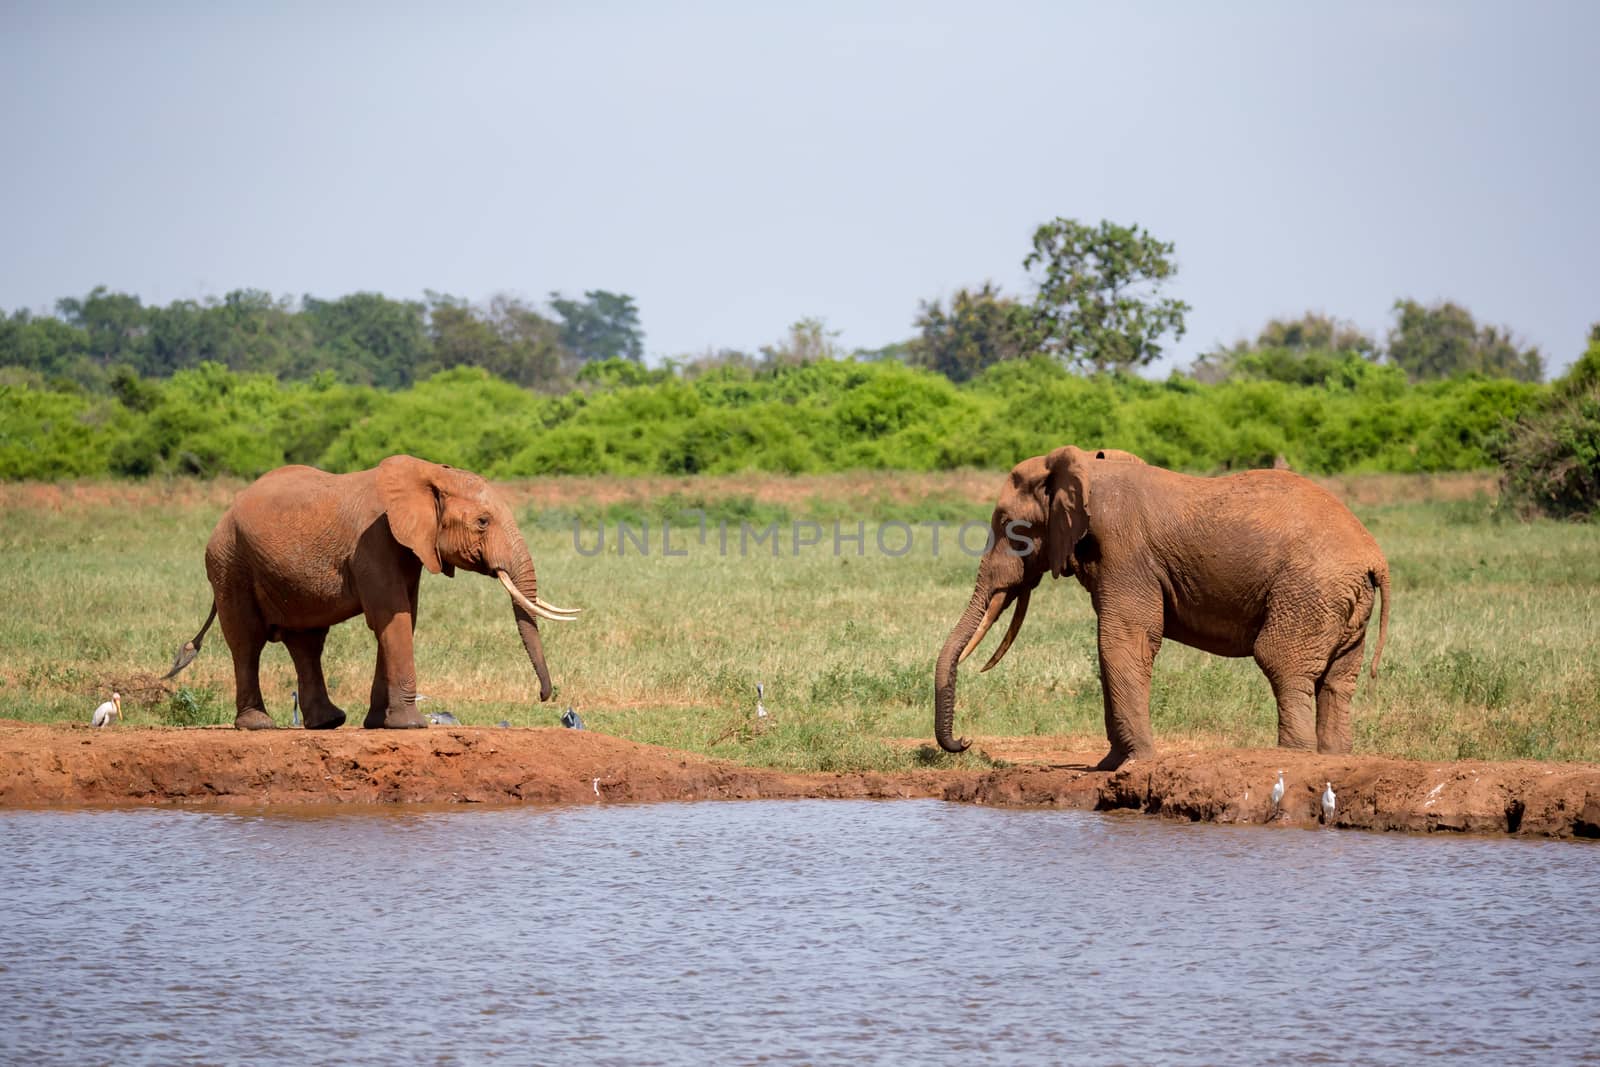 Waterhole in the savannah with some red elephants